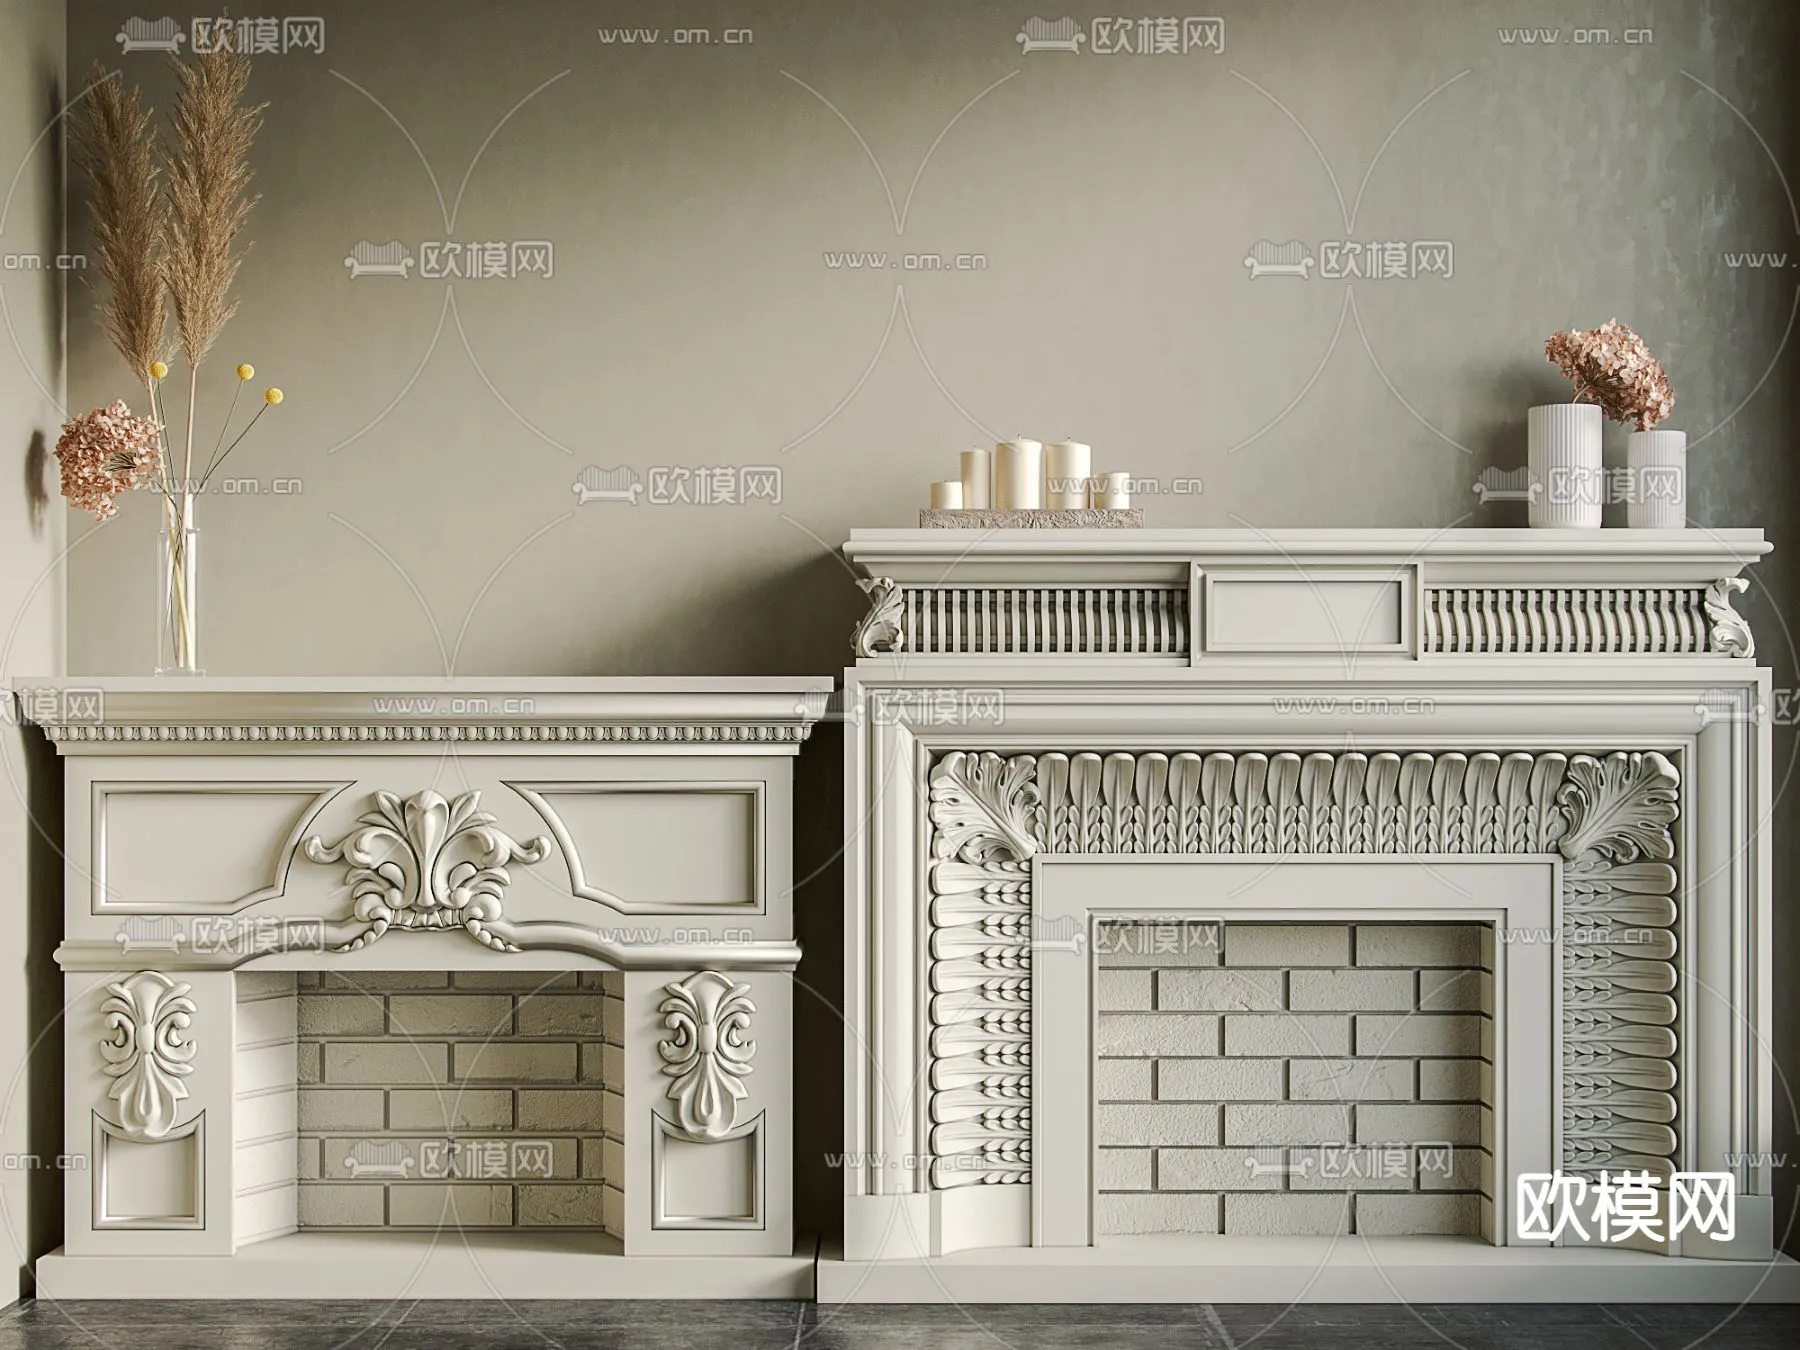 CLASSIC – FIREPLACE 3DMODELS – 068